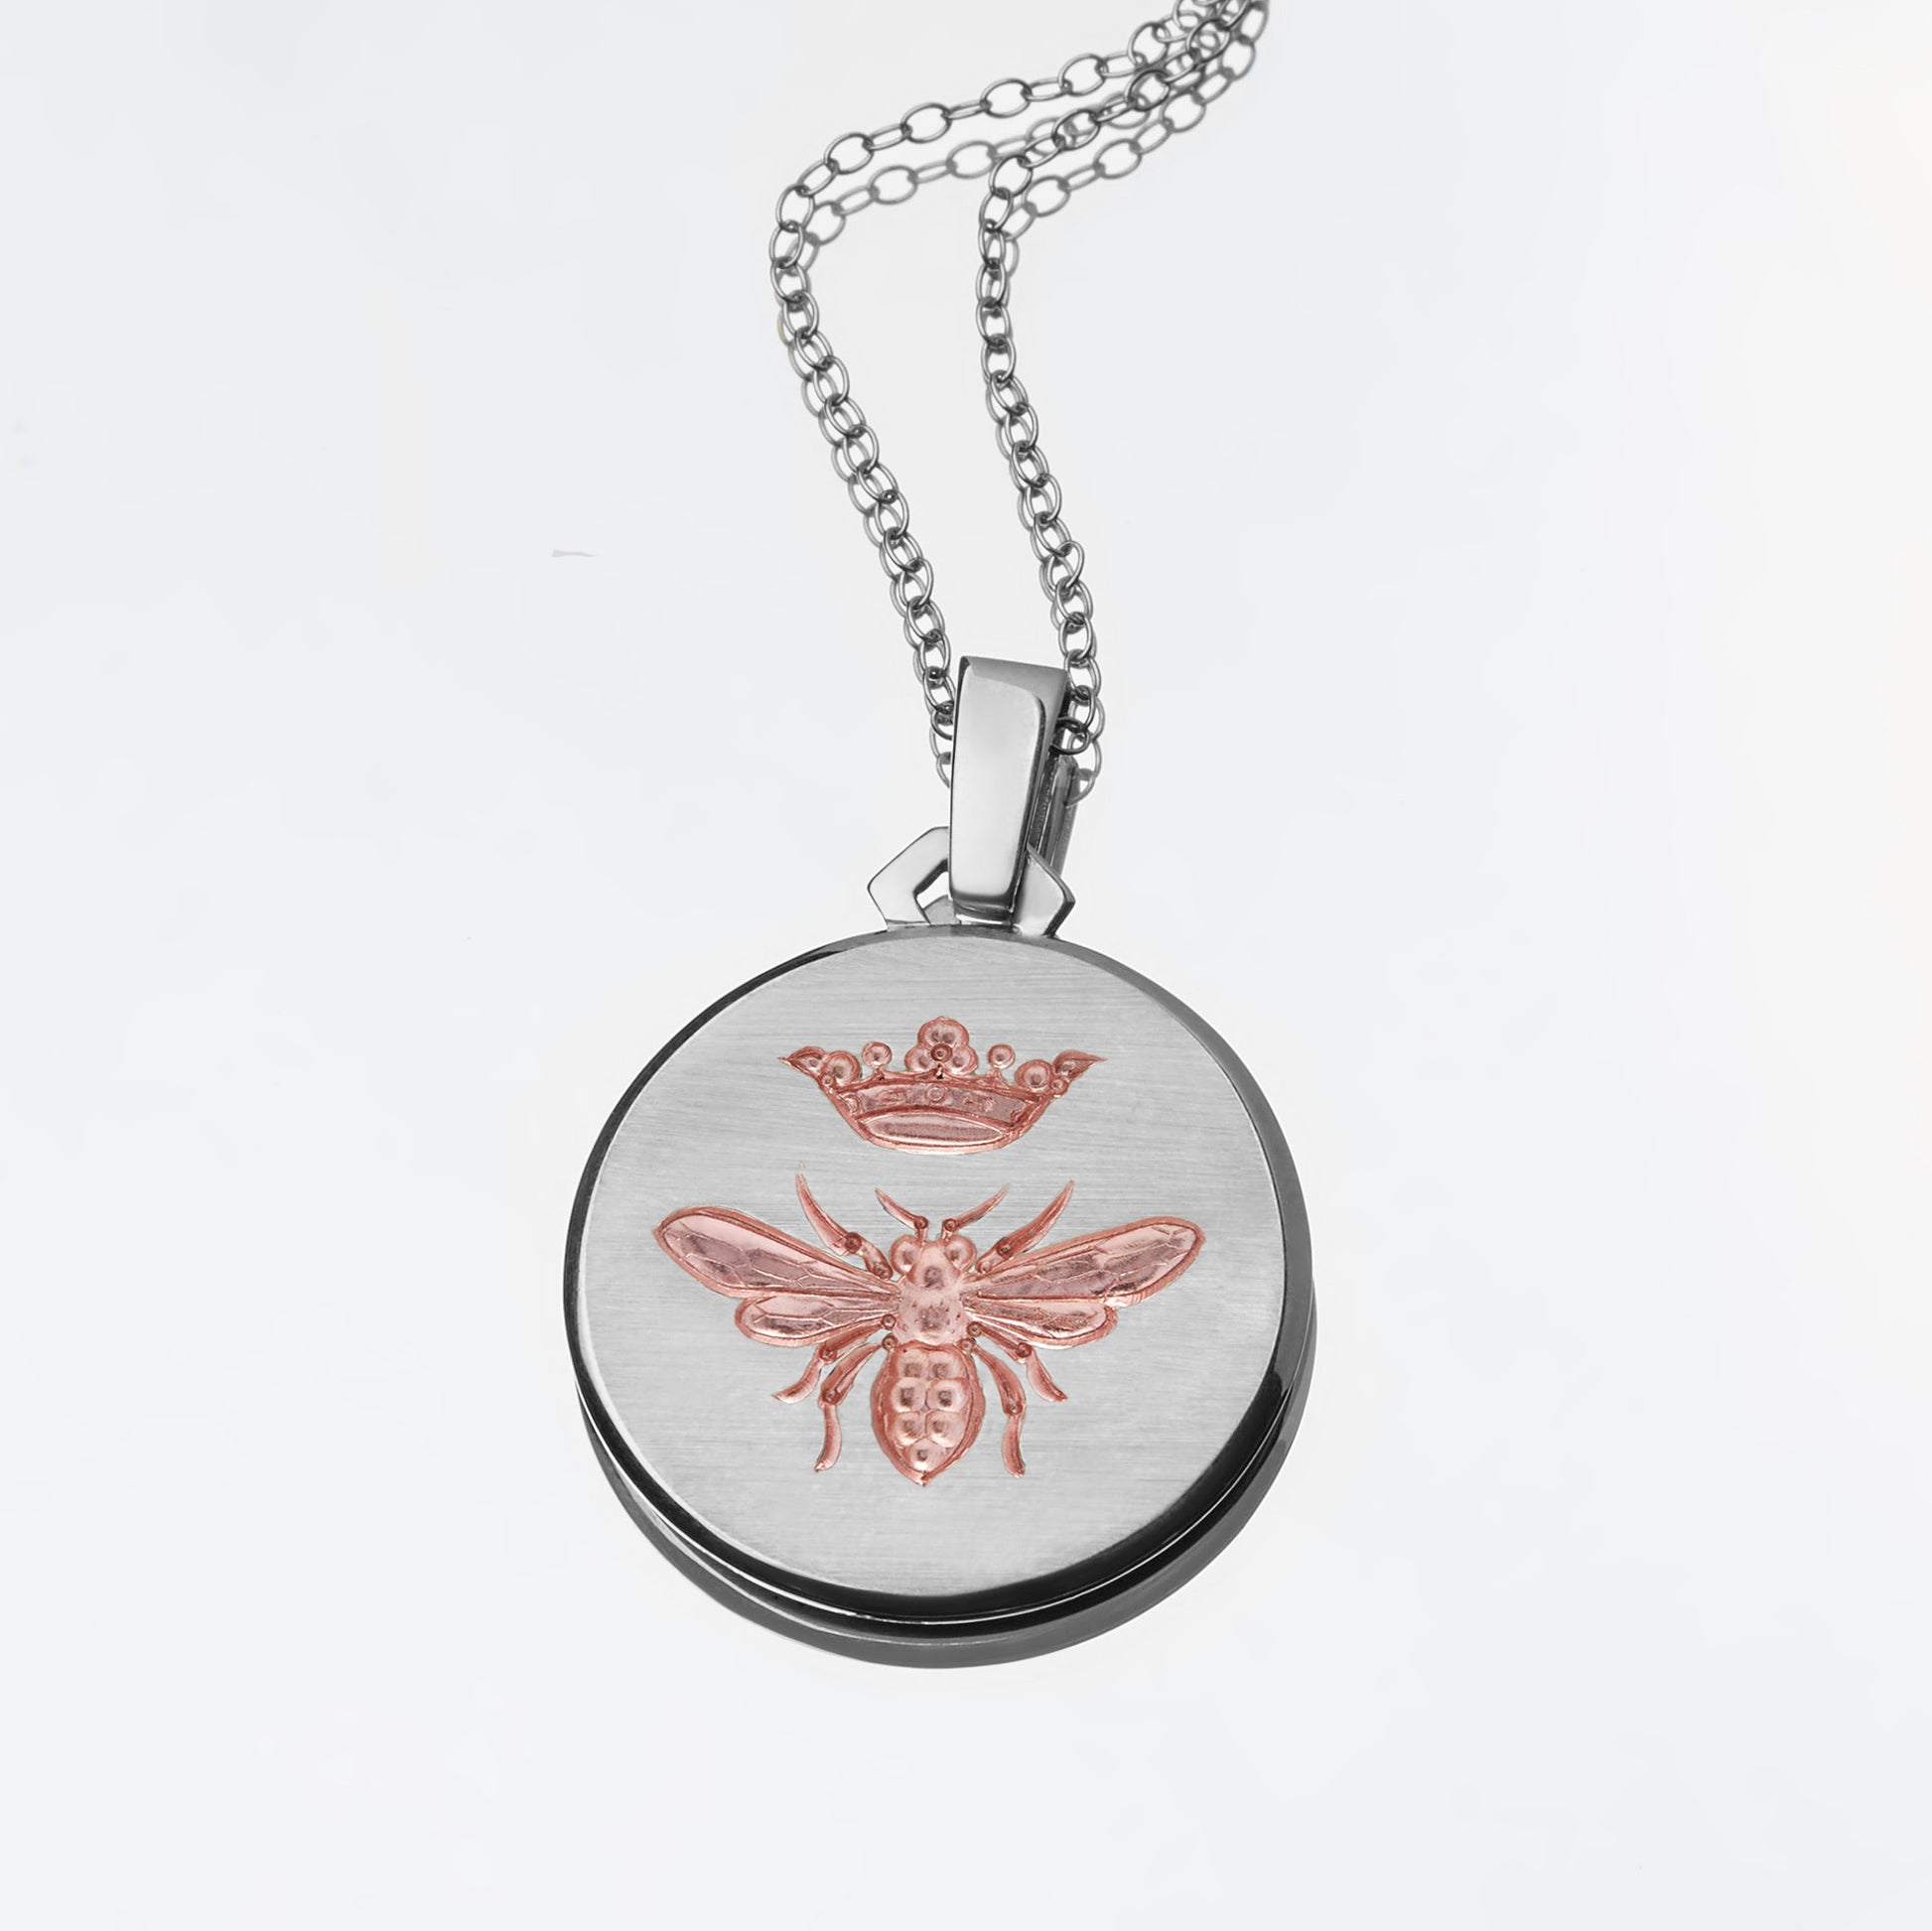 Castro Smith Jewelry hand engraved silver pendants for women with bee and crown design